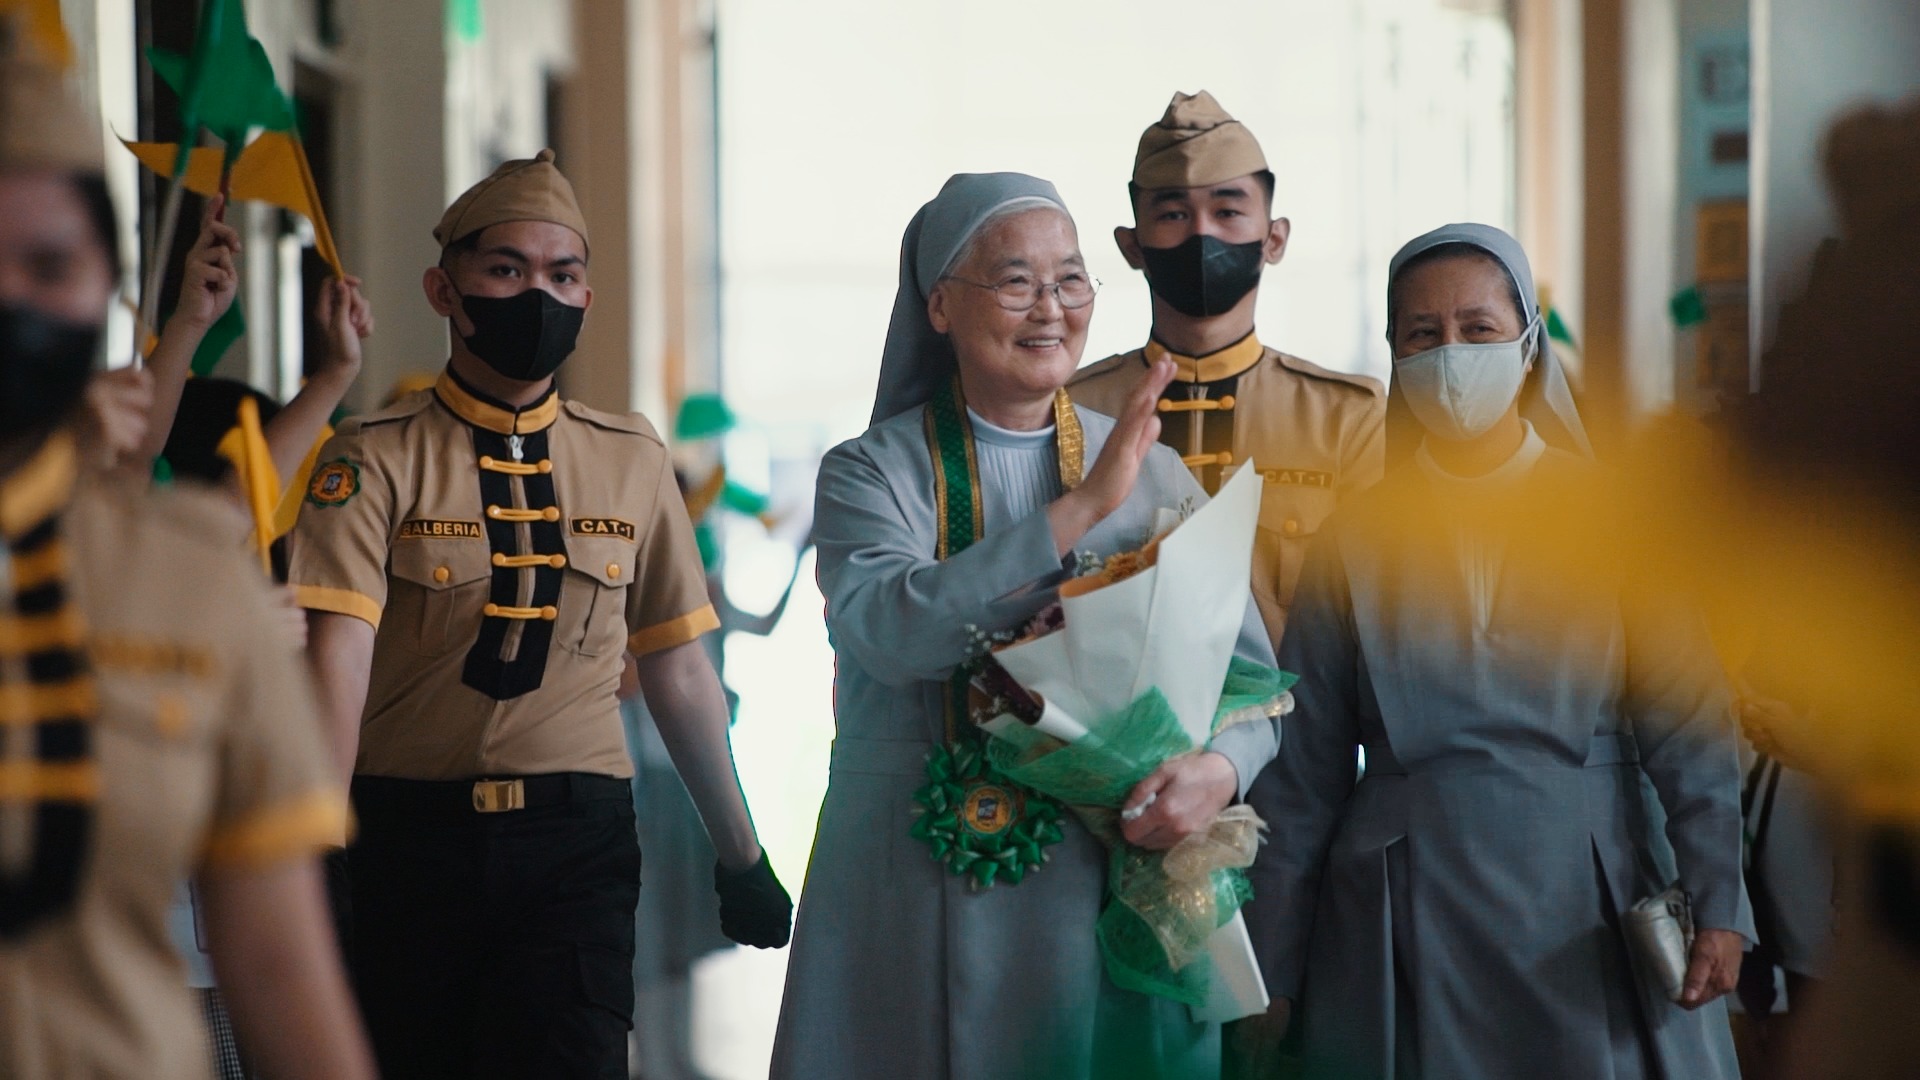 MOTHER GENERAL PAYS CANONICAL VISIT TO MINDANAO